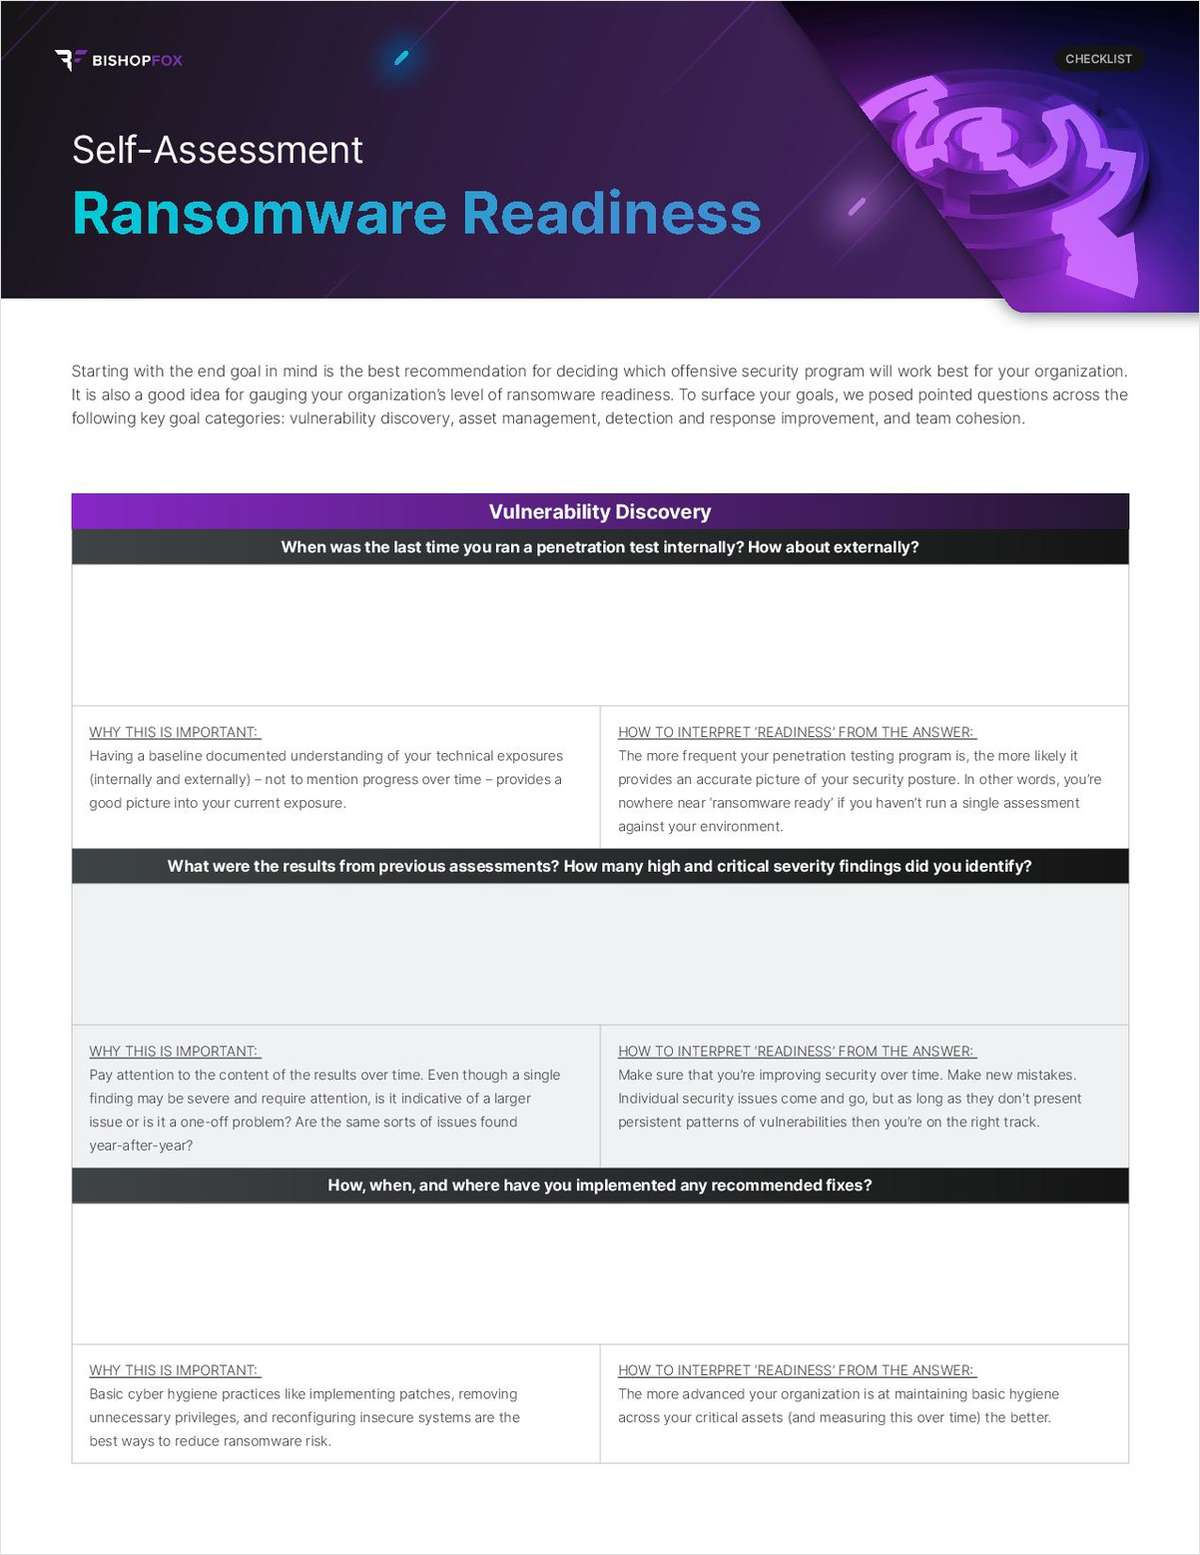 Ready or Not: A Ransomware Self-Assessment